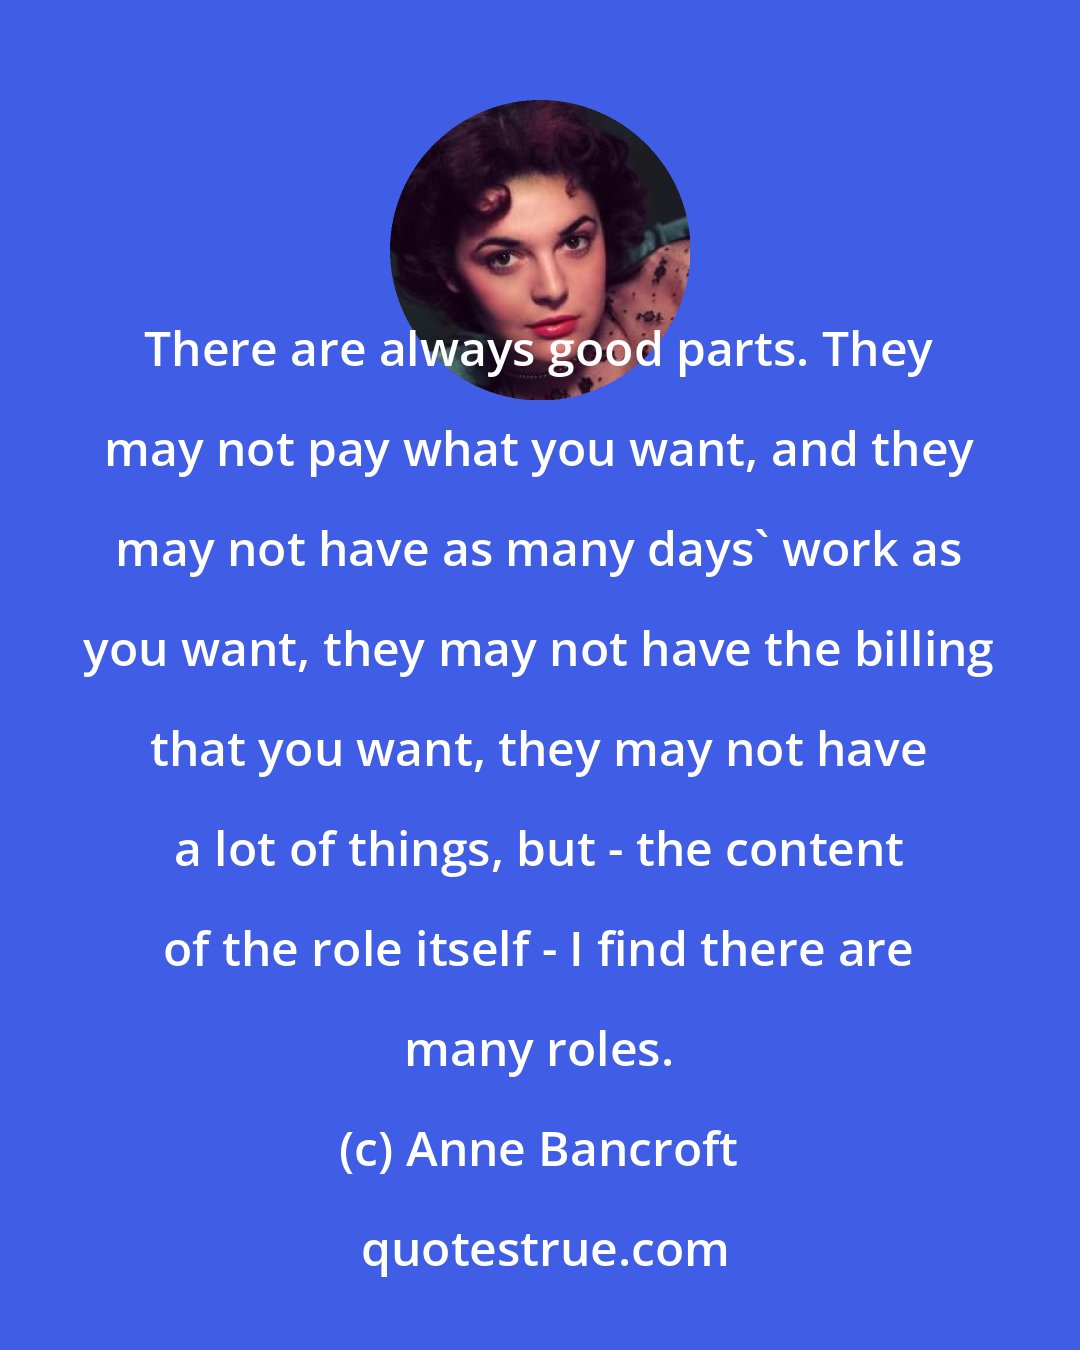 Anne Bancroft: There are always good parts. They may not pay what you want, and they may not have as many days' work as you want, they may not have the billing that you want, they may not have a lot of things, but - the content of the role itself - I find there are many roles.